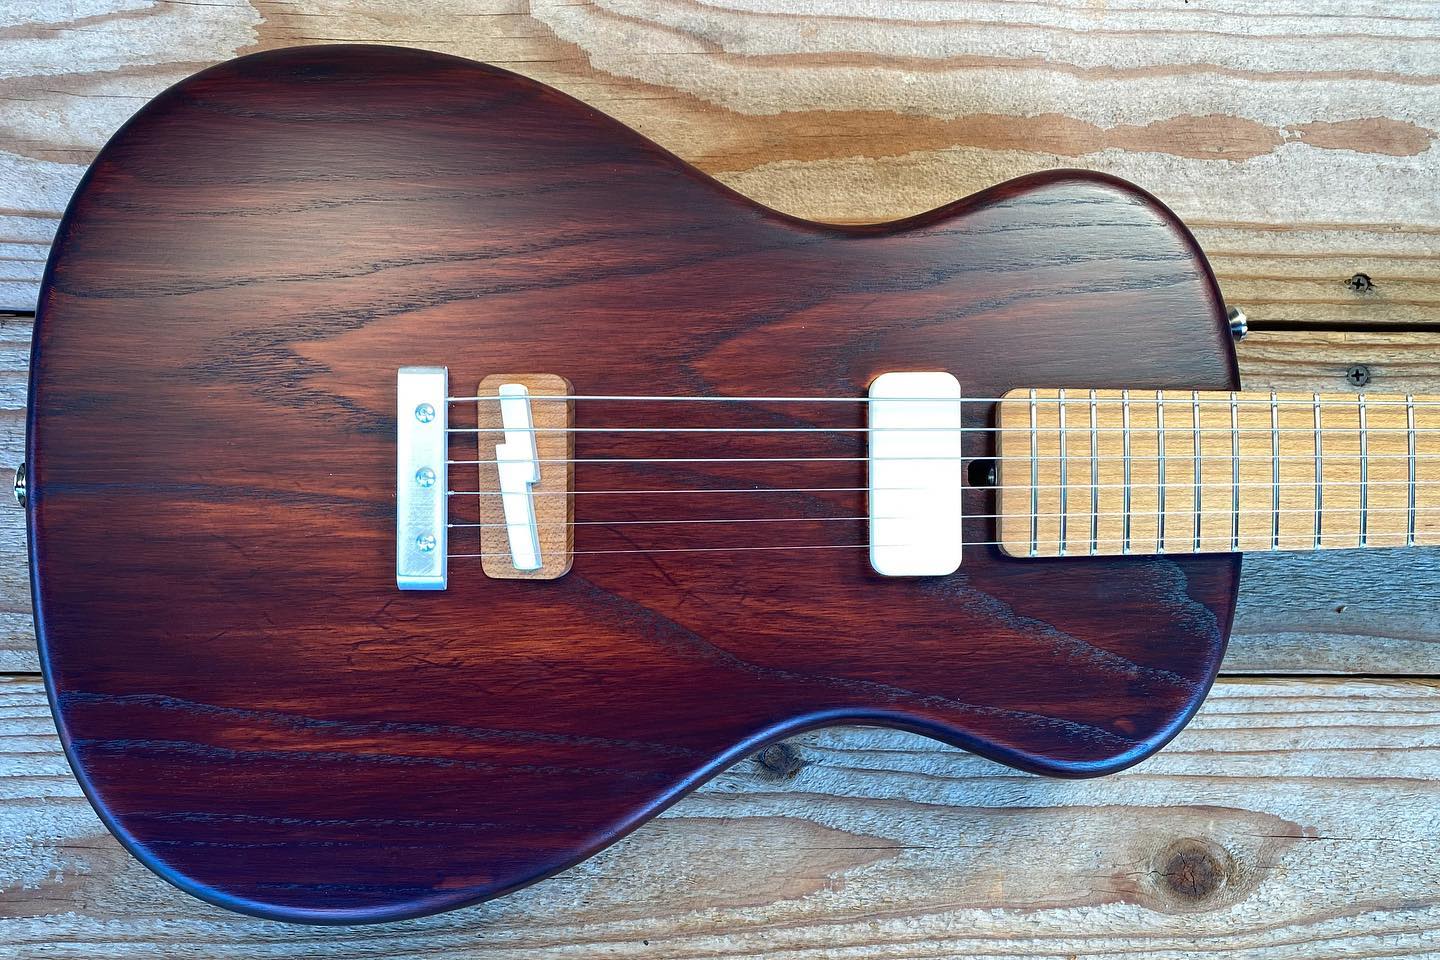 The body of the Weir Guitars Poorboy